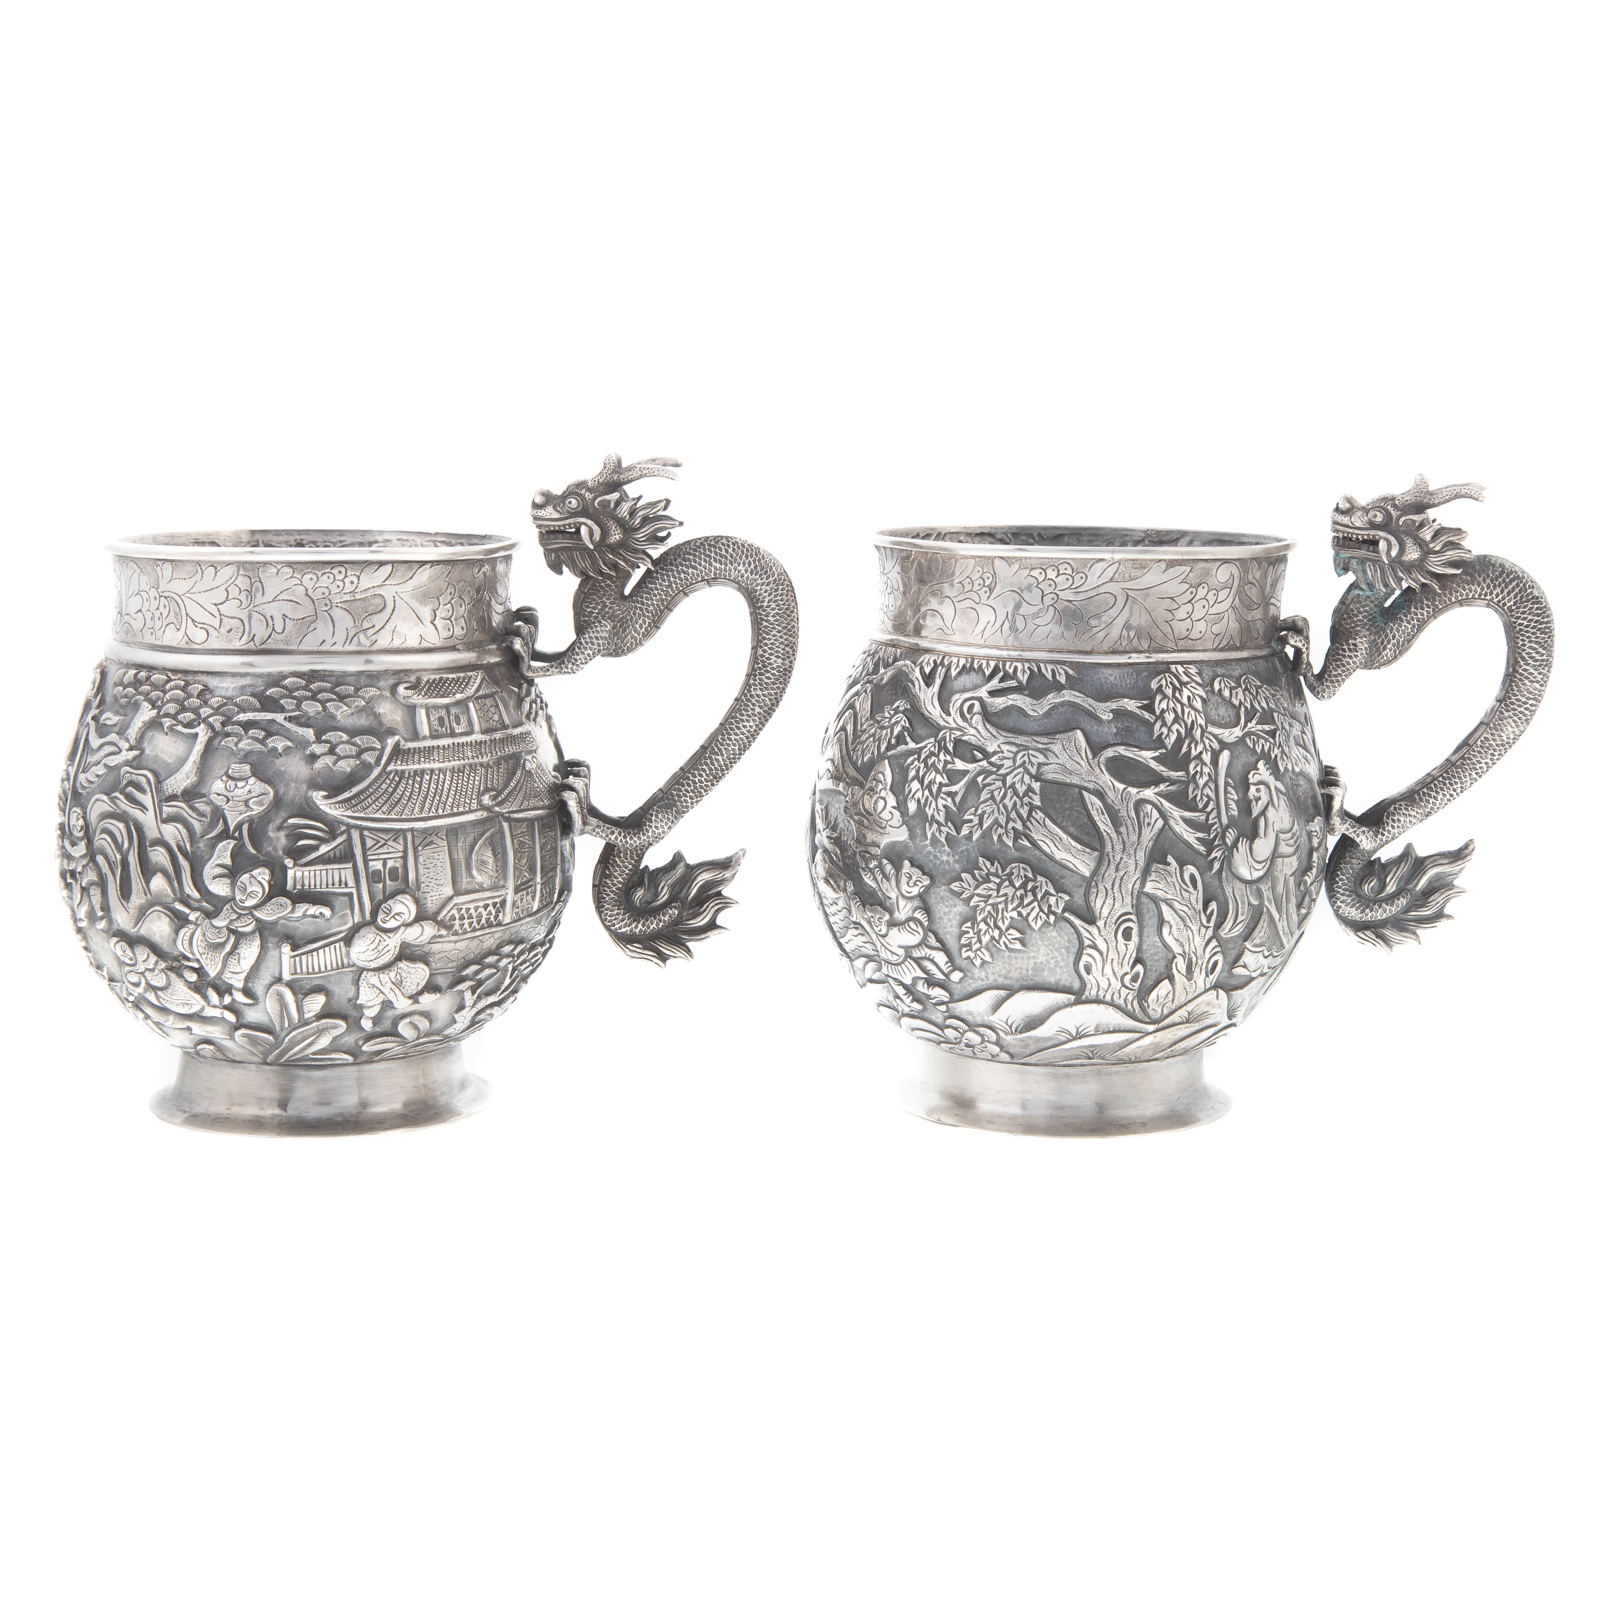 PAIR CHINESE EXPORT STERLING SILVER